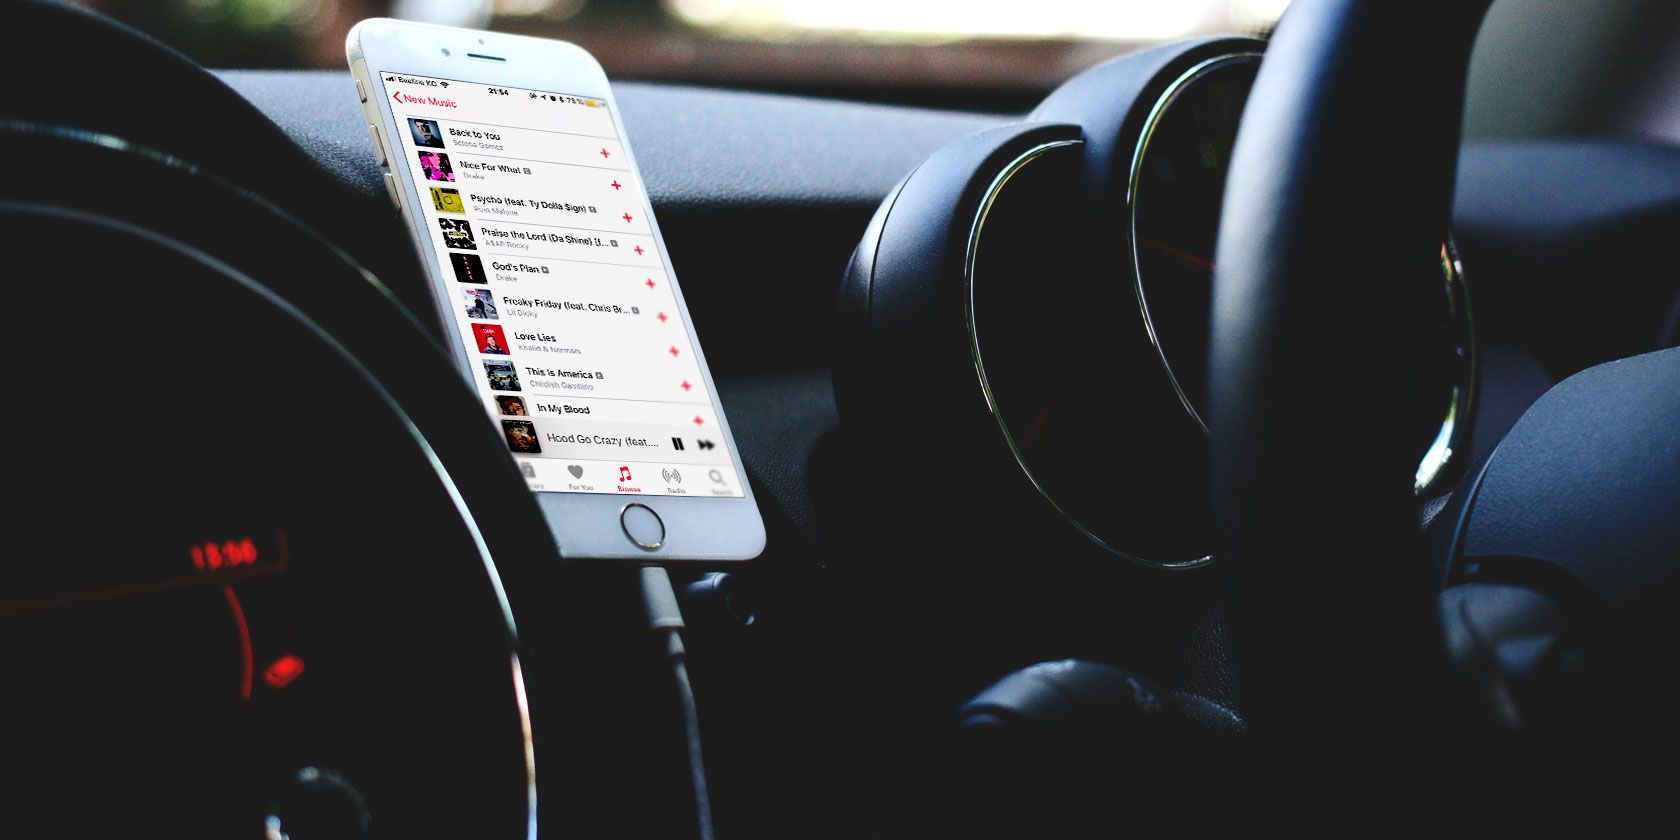 How to Connect Your Phone to a Car Stereo